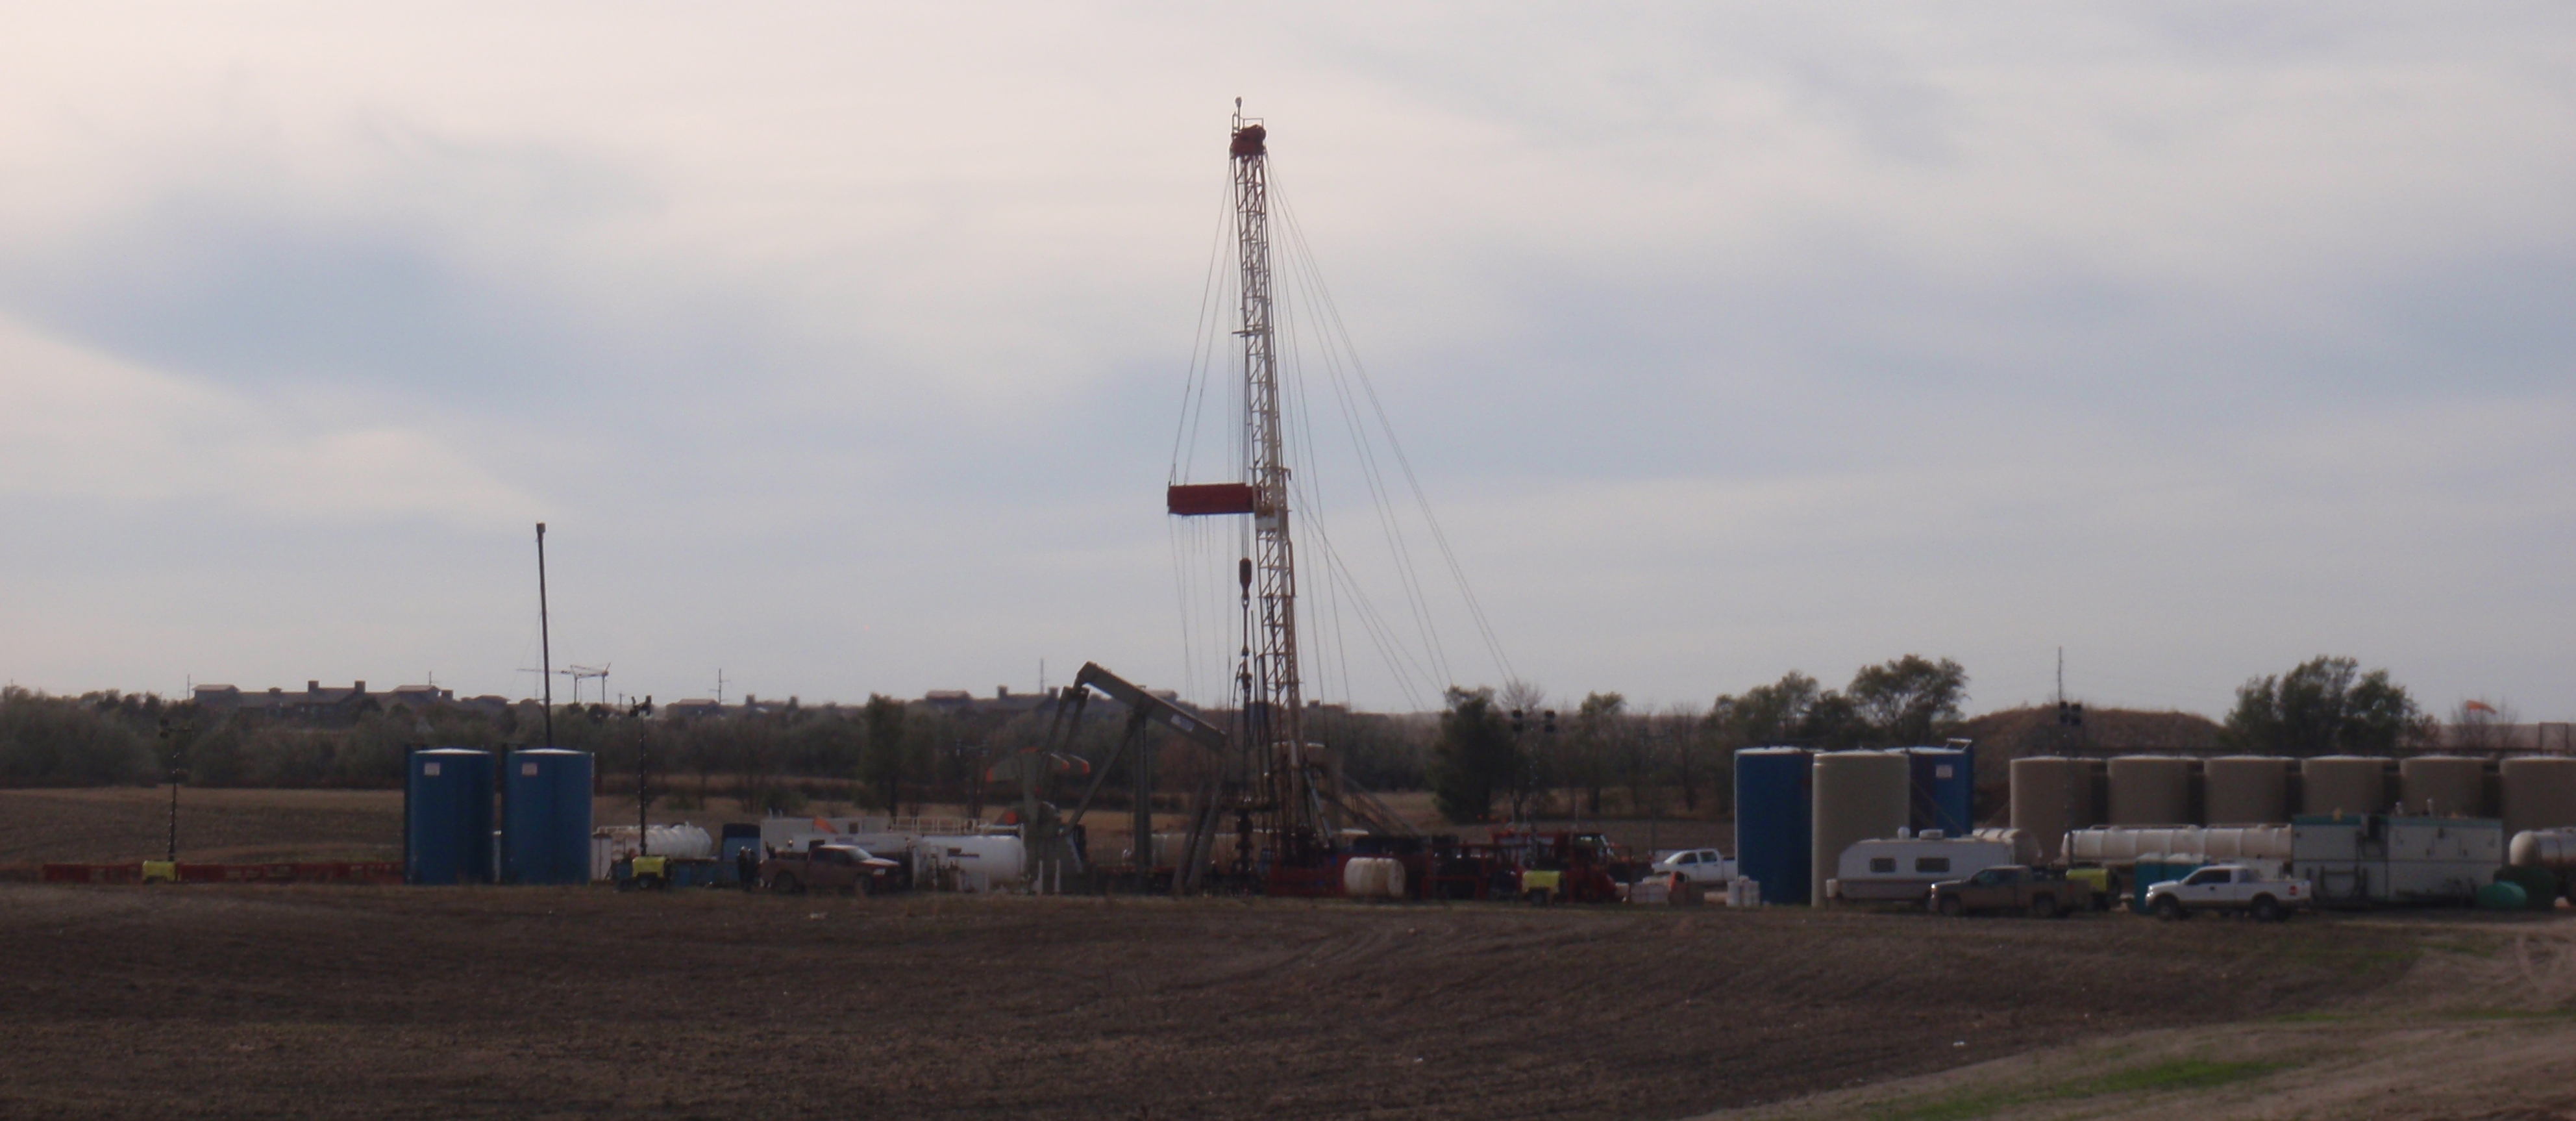 Workover rig in October 2014. Photo by James Ulvog.